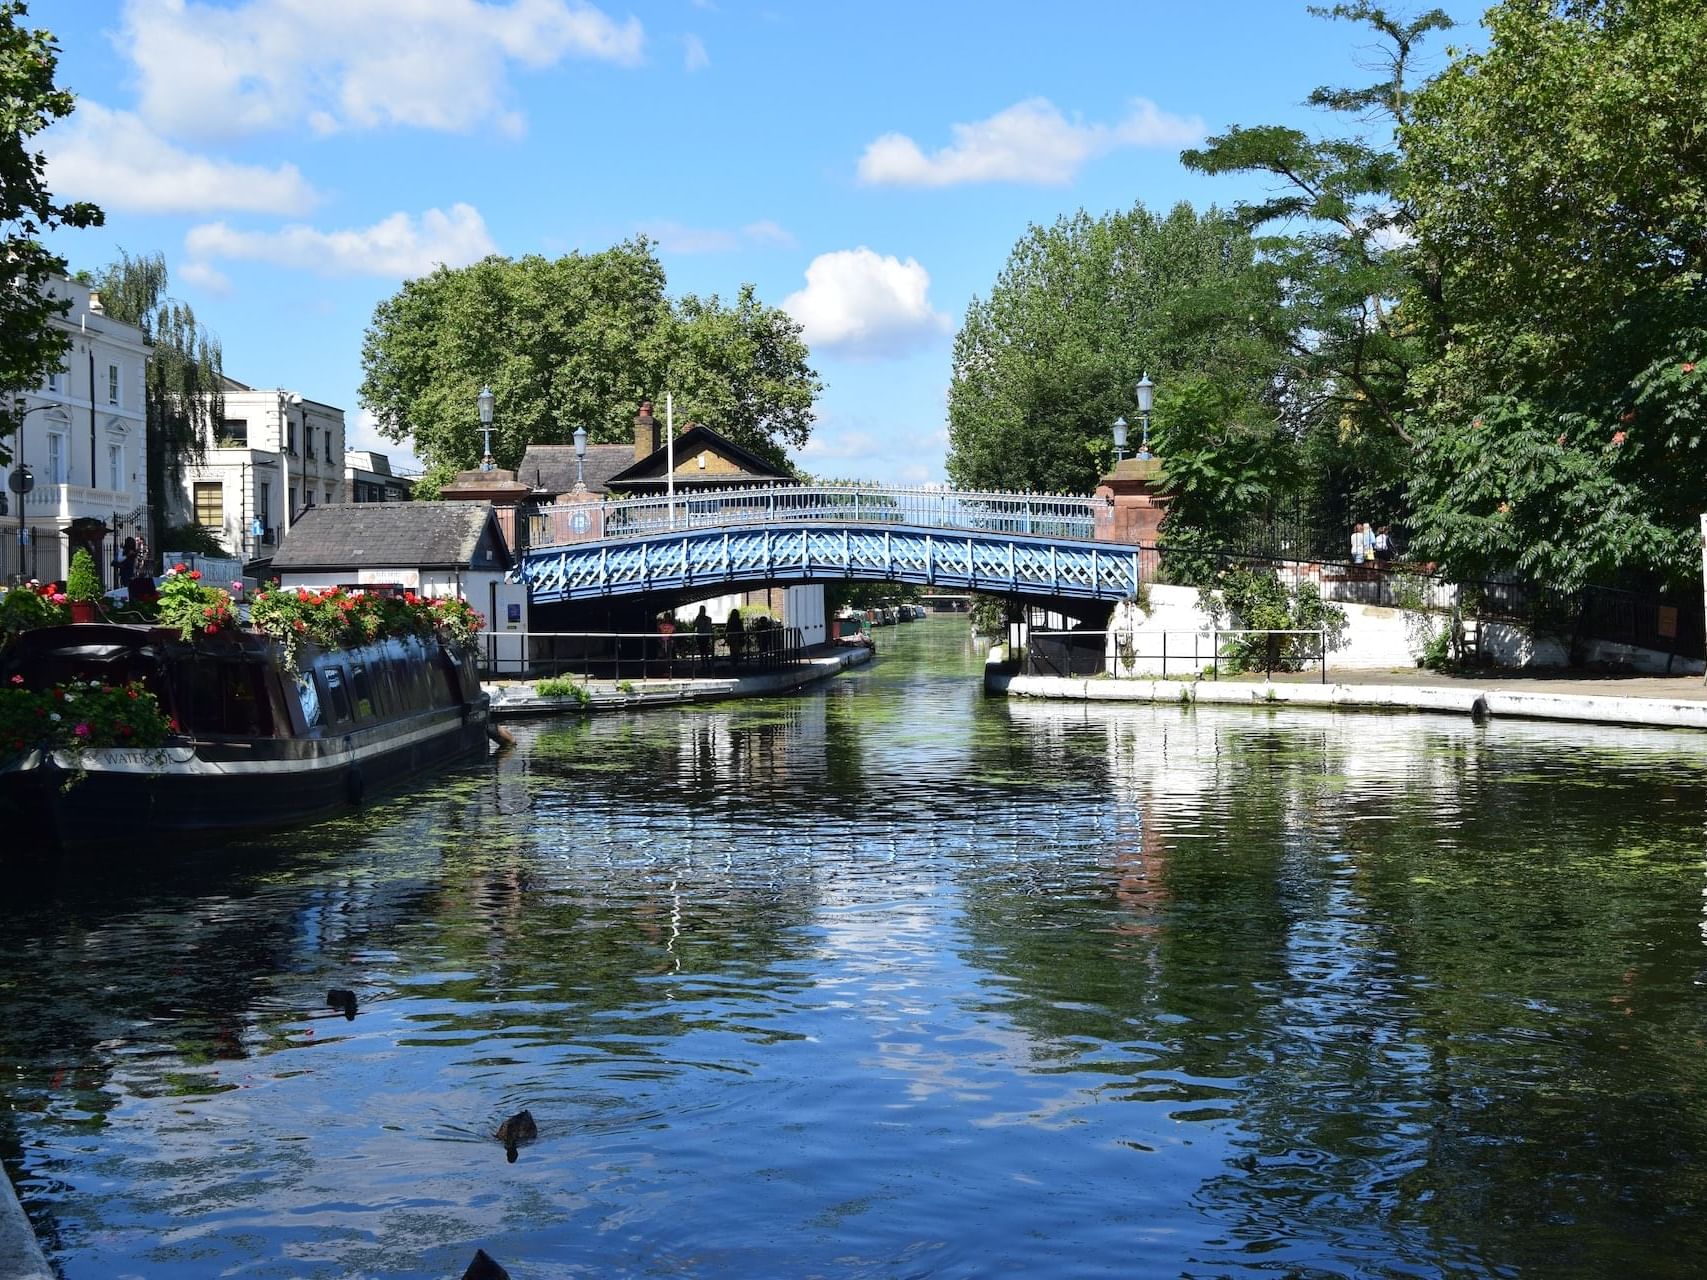 view of canals and bridge at Little Venice in London 